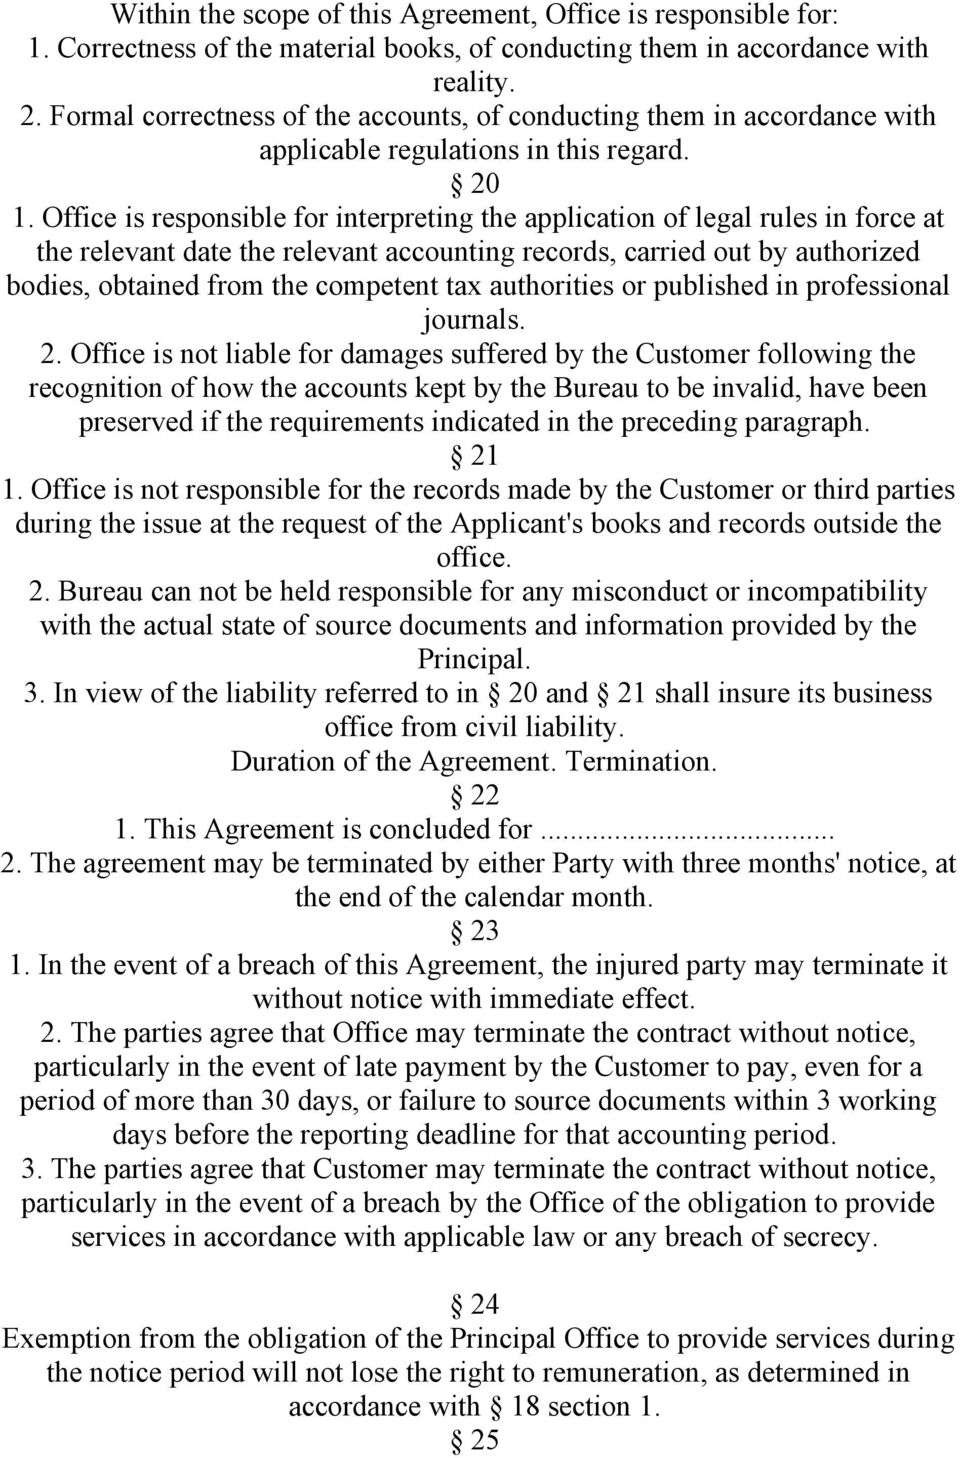 Office is responsible for interpreting the application of legal rules in force at the relevant date the relevant accounting records, carried out by authorized bodies, obtained from the competent tax